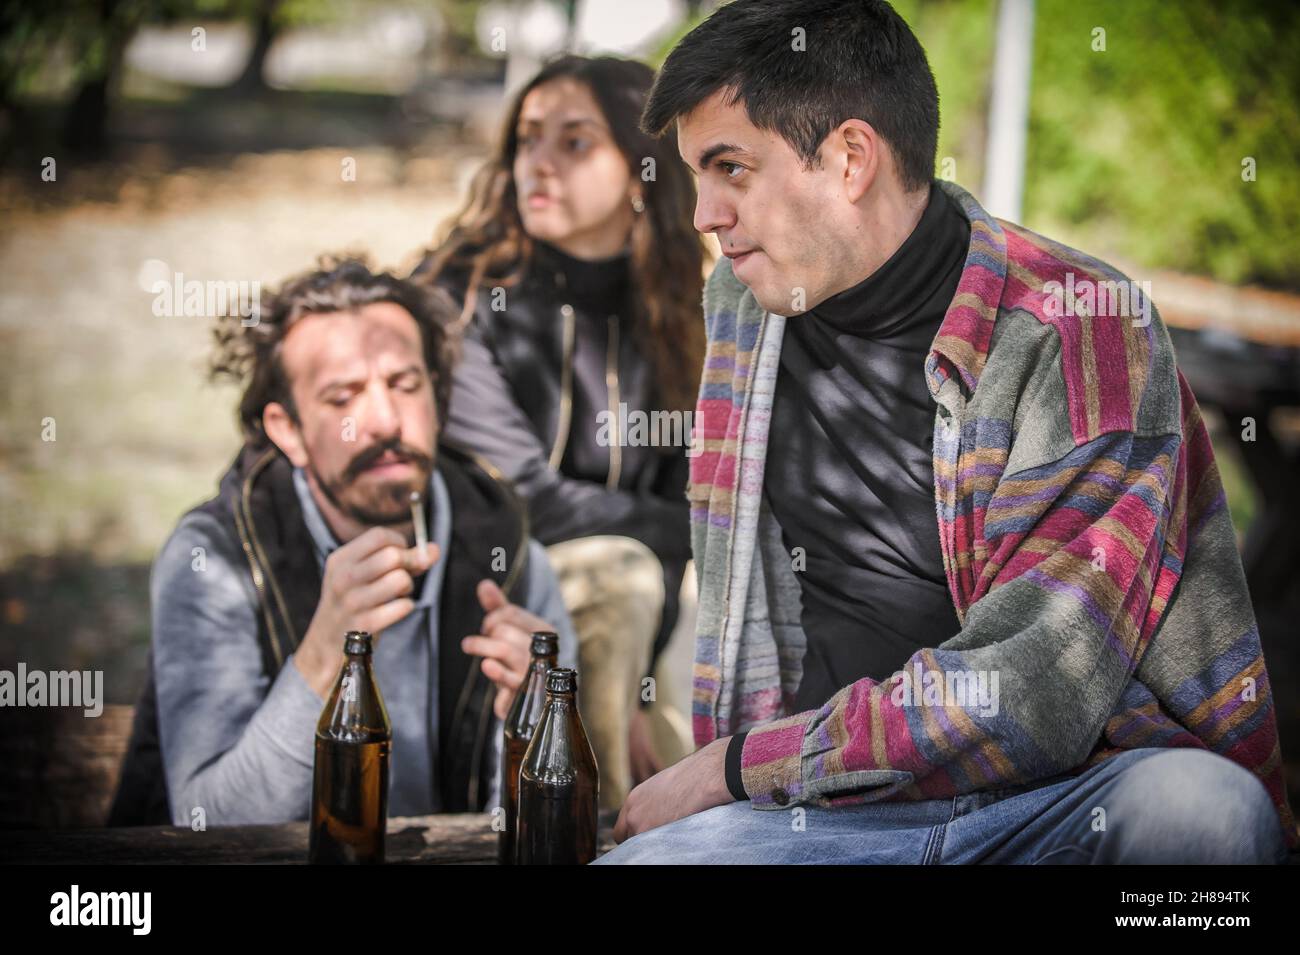 Group of female and male young friends drinks beer from bottle and smoking cannabis marijuana ganja or hashish joint in public park outdoor. Young peo Stock Photo